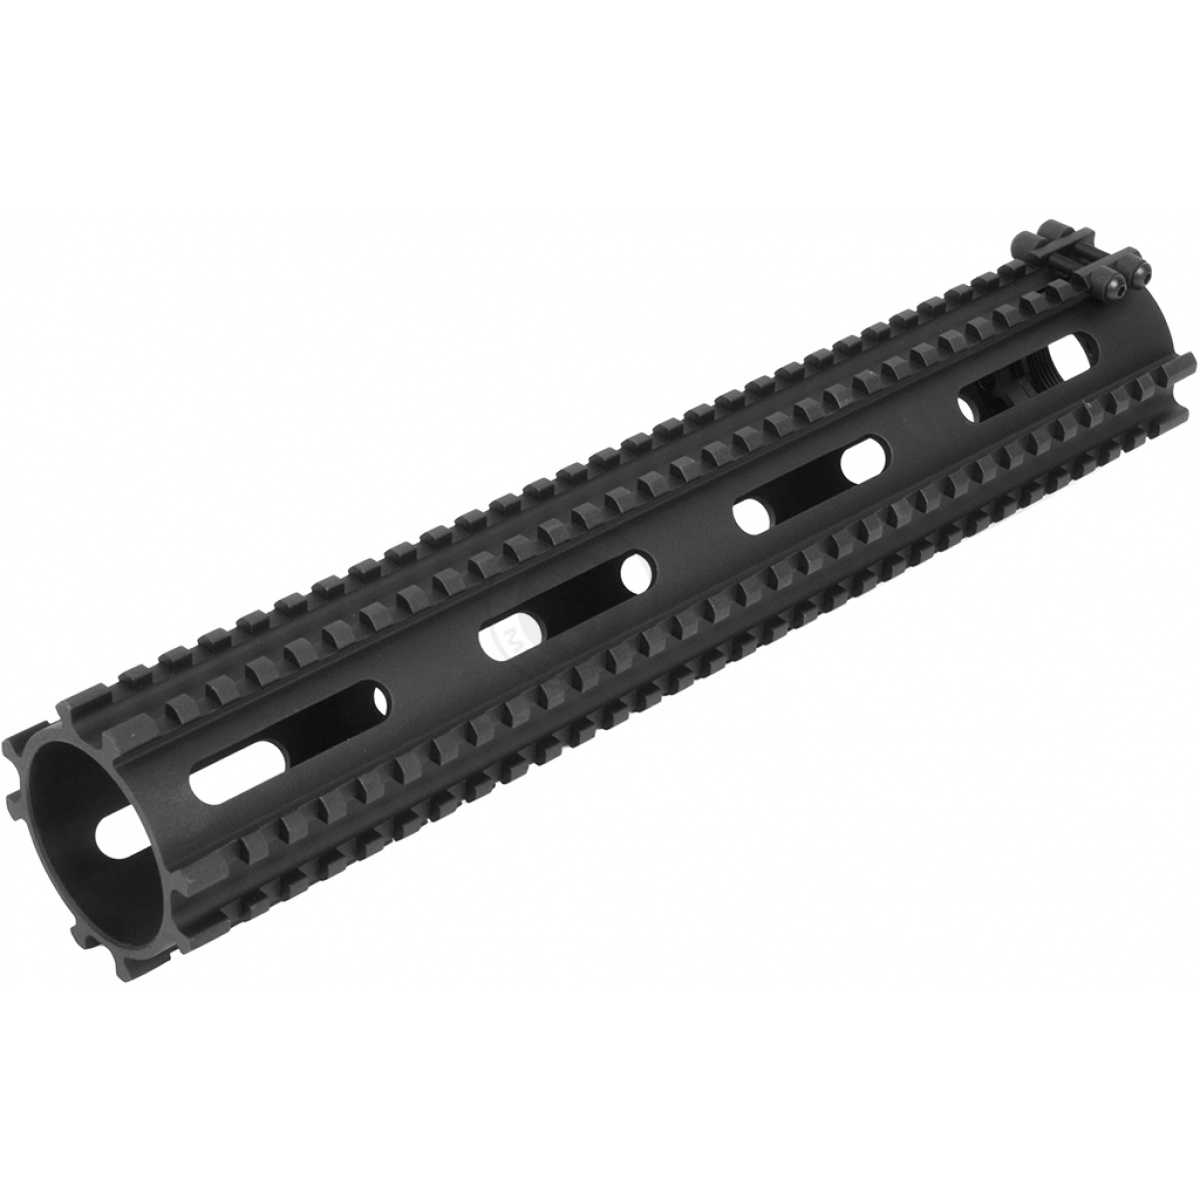 JBU Licensed Olympic Arms FIRSH Tactical Handguard Set for M16 AEGs ...